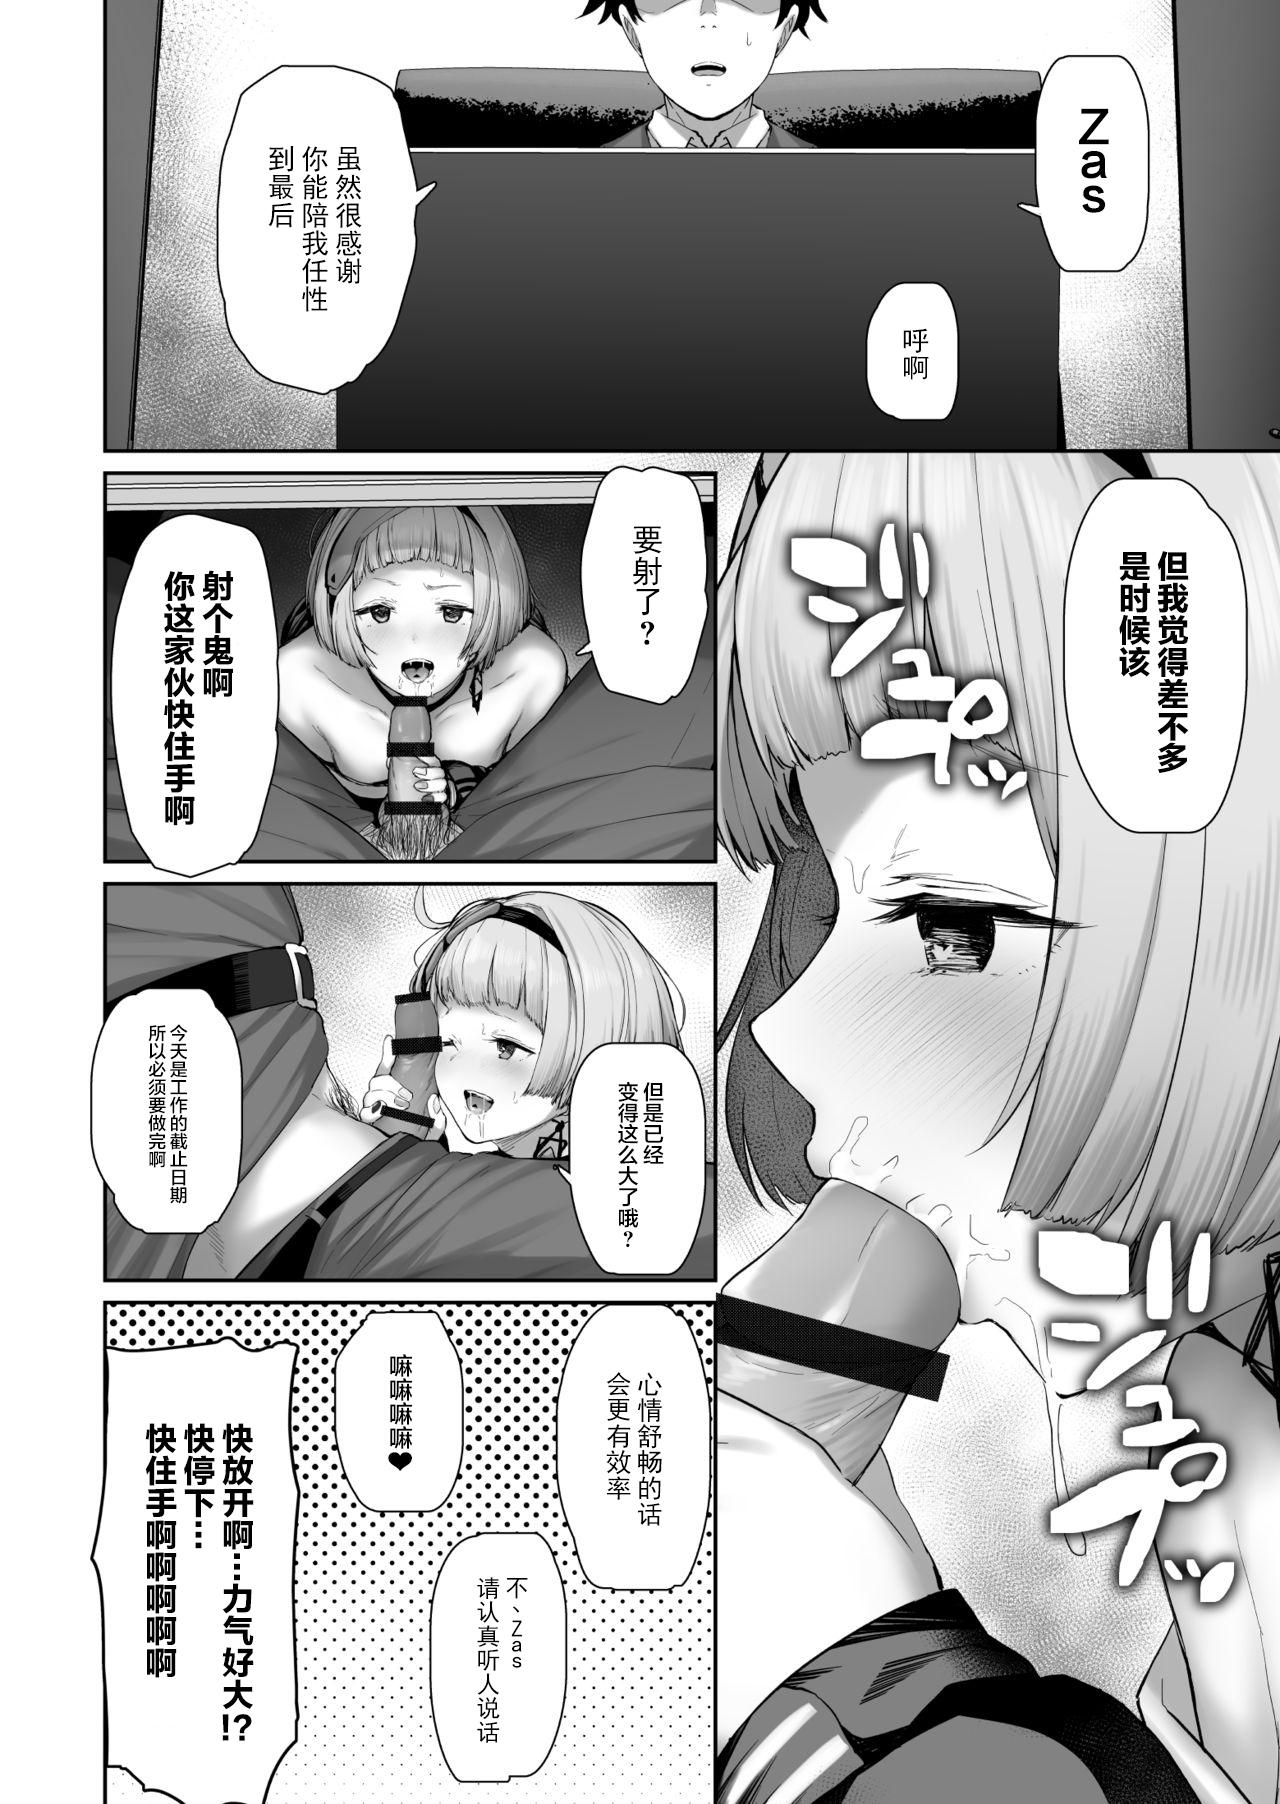 Nice Ass Zas M21 - Girls frontline Playing - Page 18